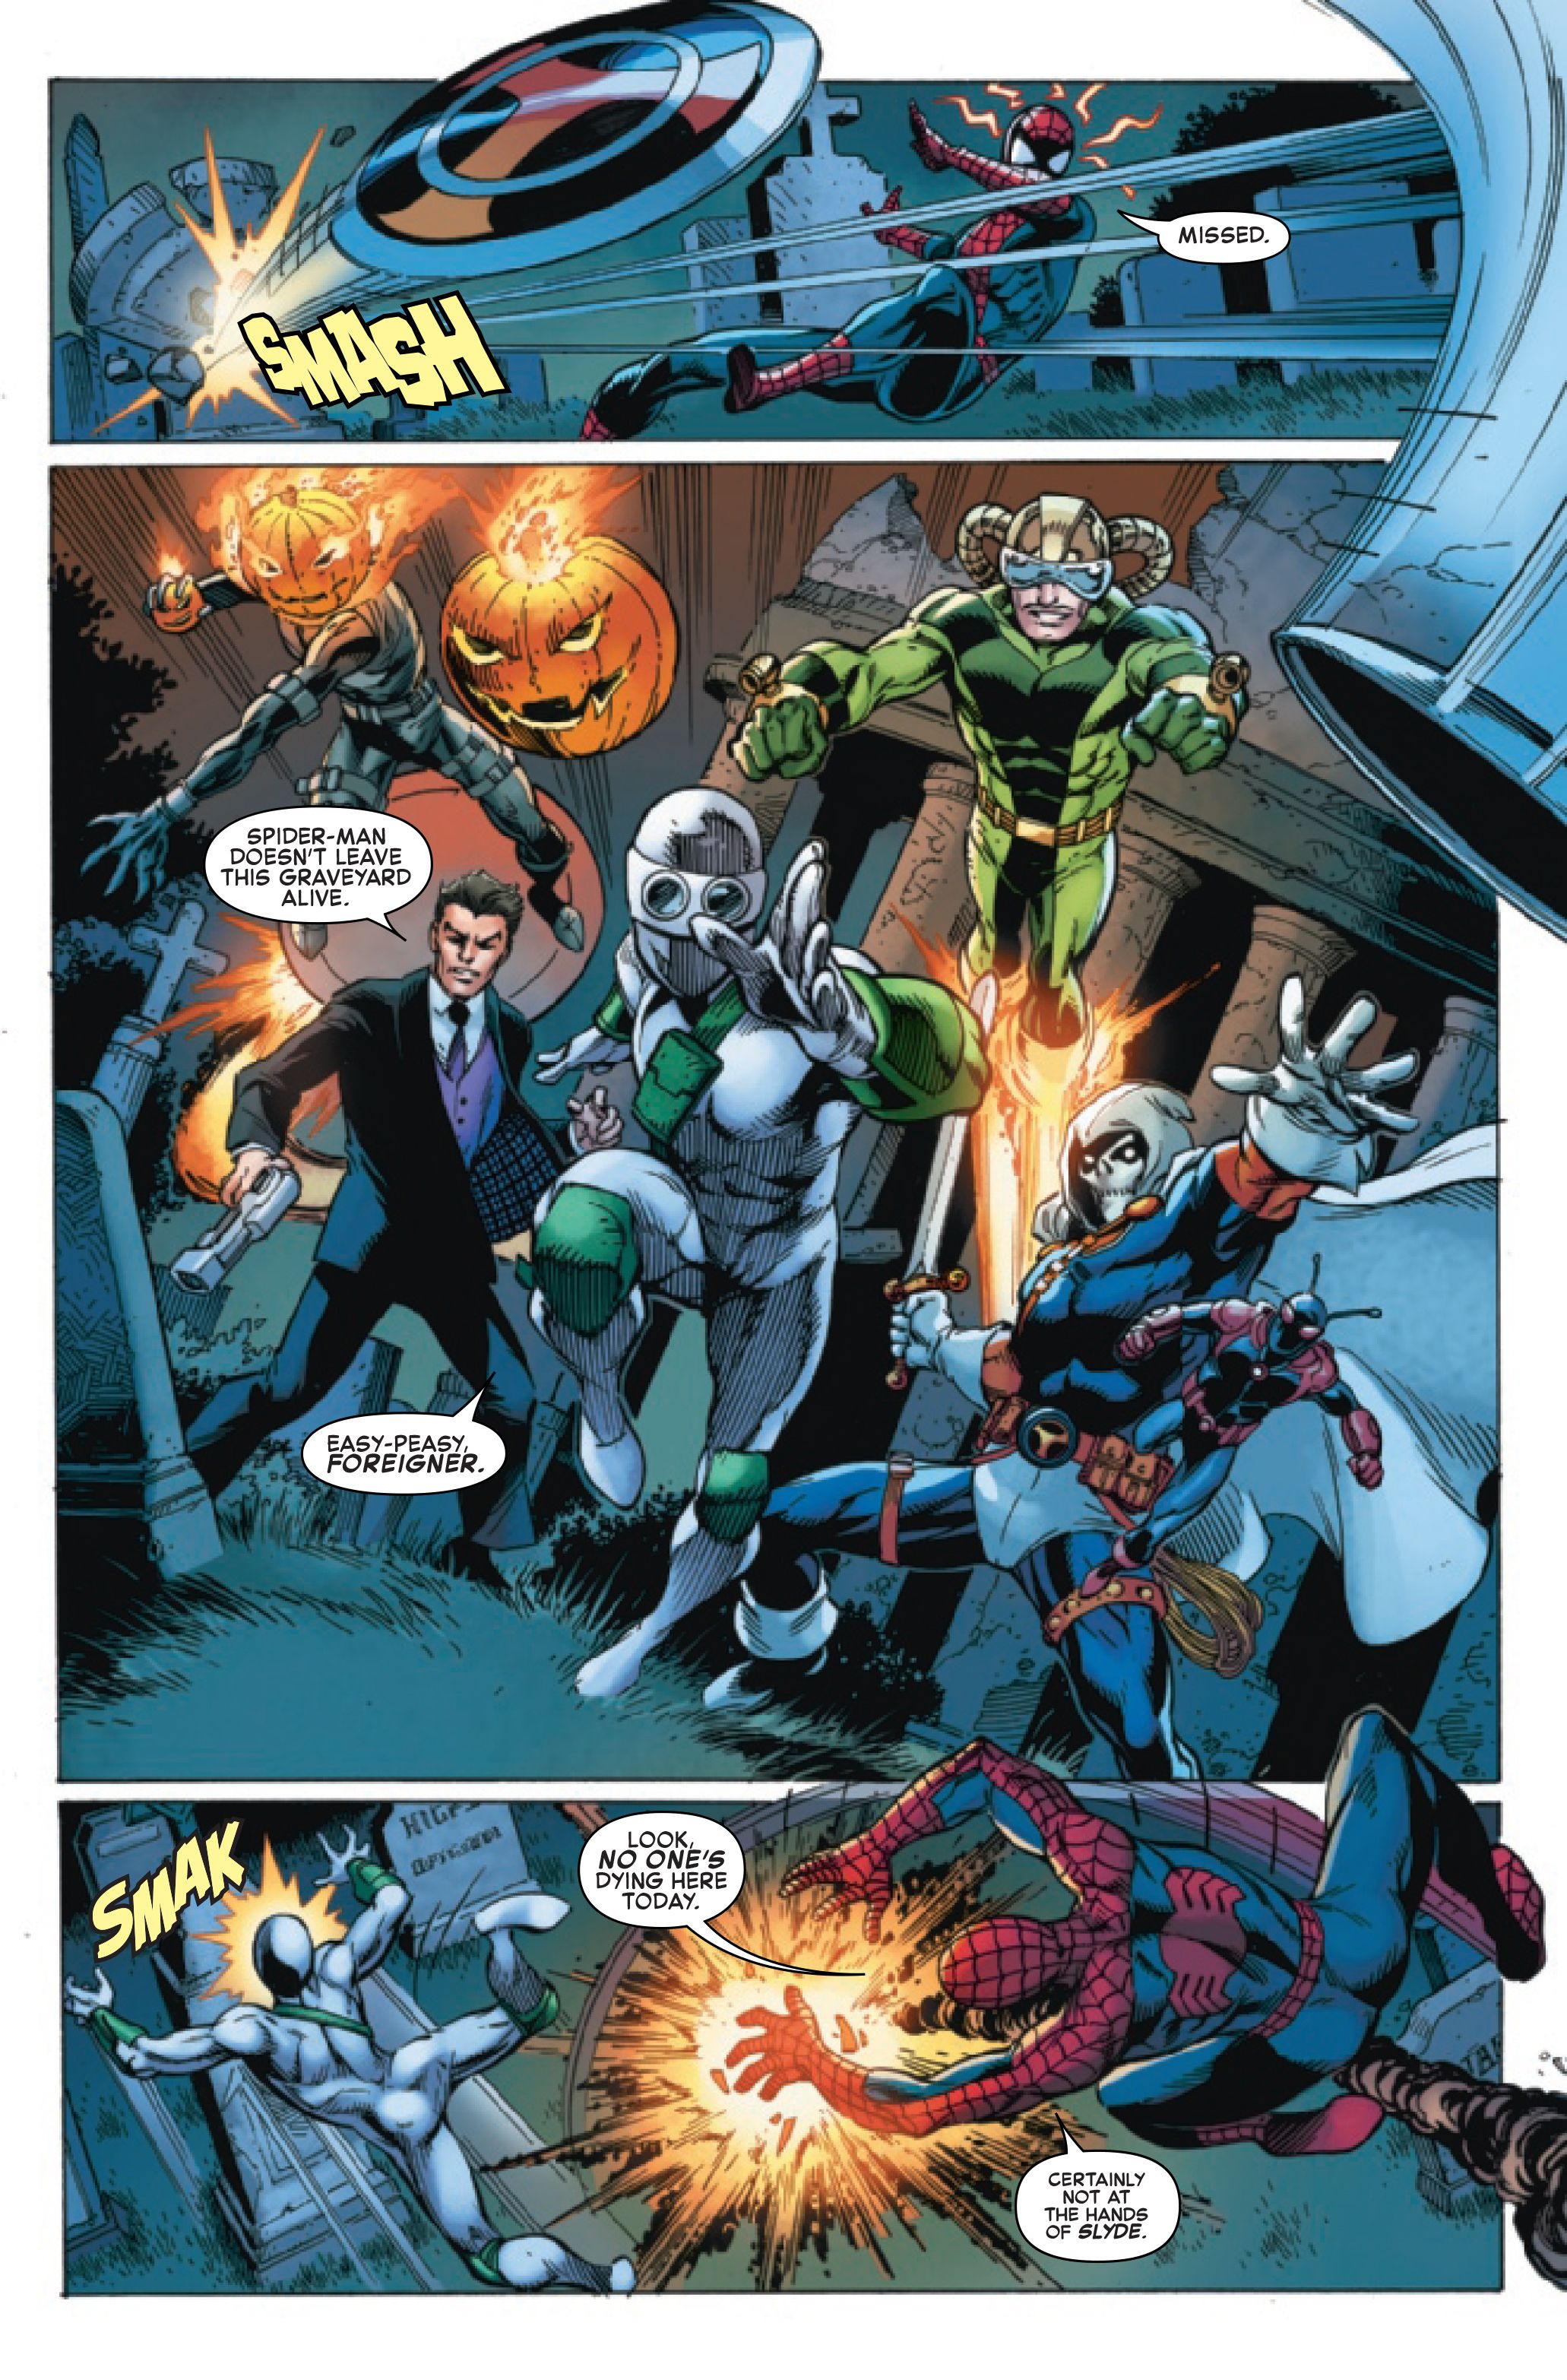 Page 4 of Marvel Comics' Sinister War #2, by Nick Spencer, Ed Brisson, Mark Bagley, Diogenes Neves, Carlos Gomez, Ze Carlos, Andrew Hennessy, John Dell, Andy Owens, Brian Reber and VC's Joe Caramagna.